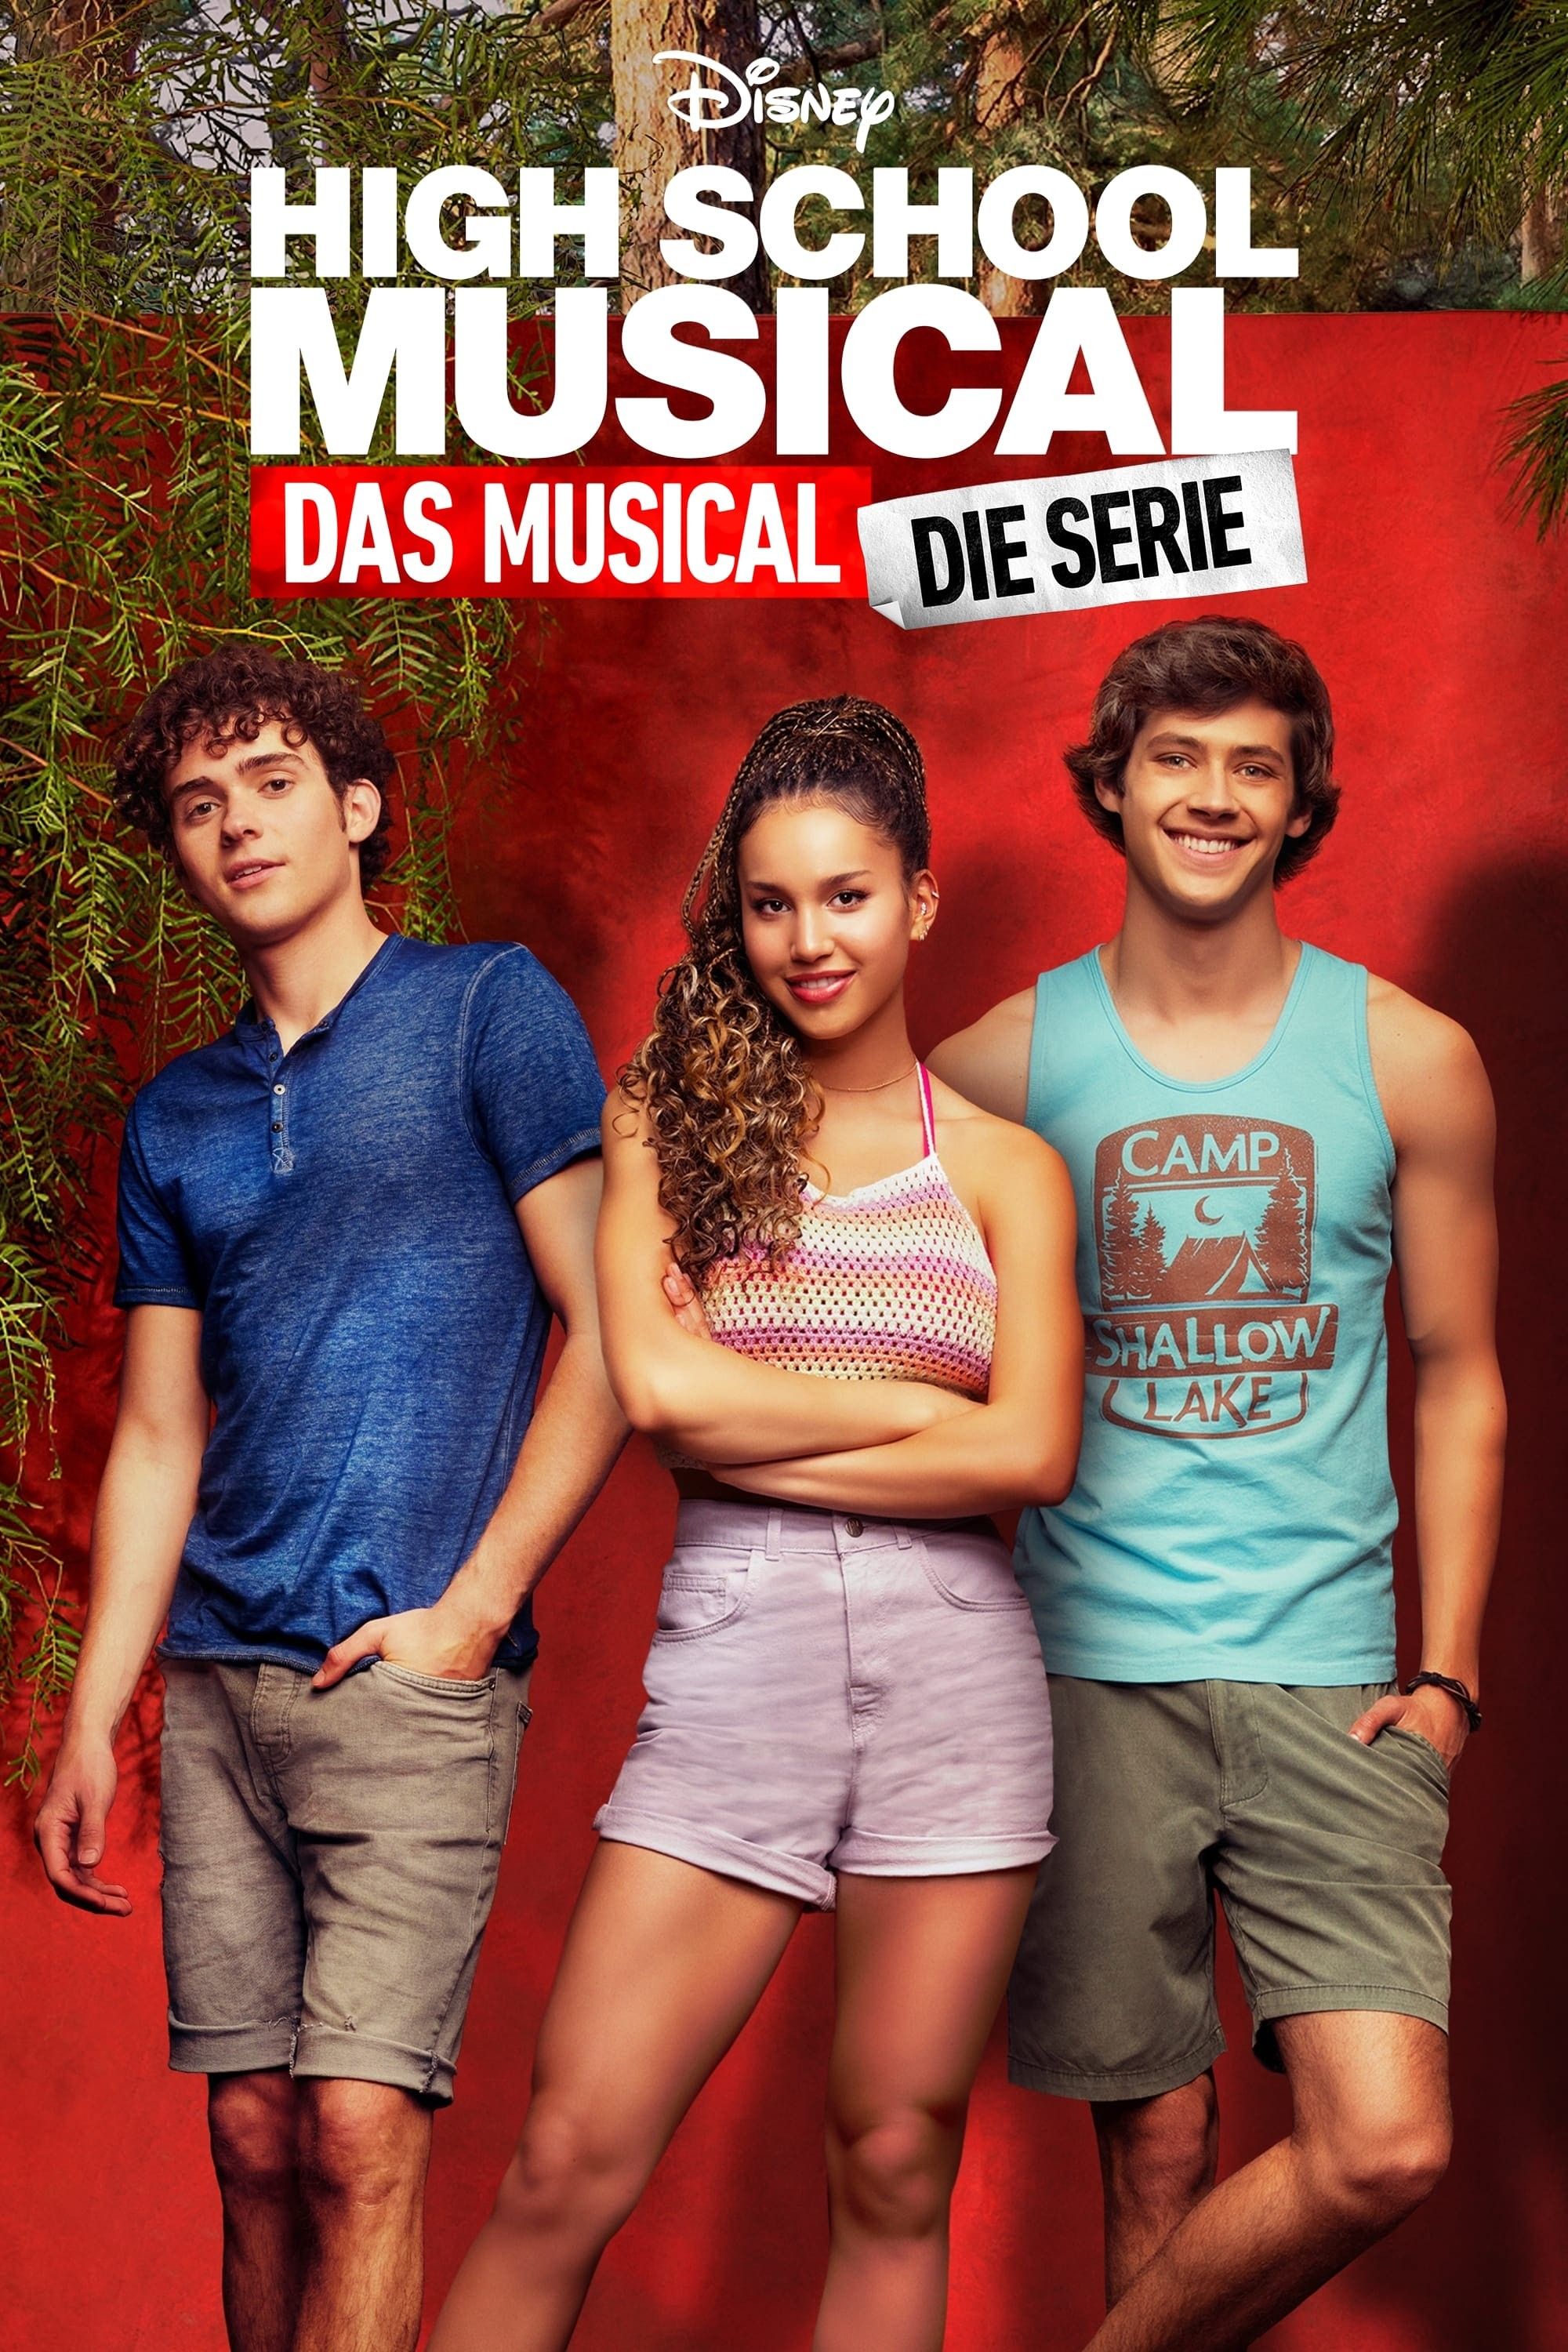 High School Musical The Musical The Series Tv Show Information And Trailers Kinocheck